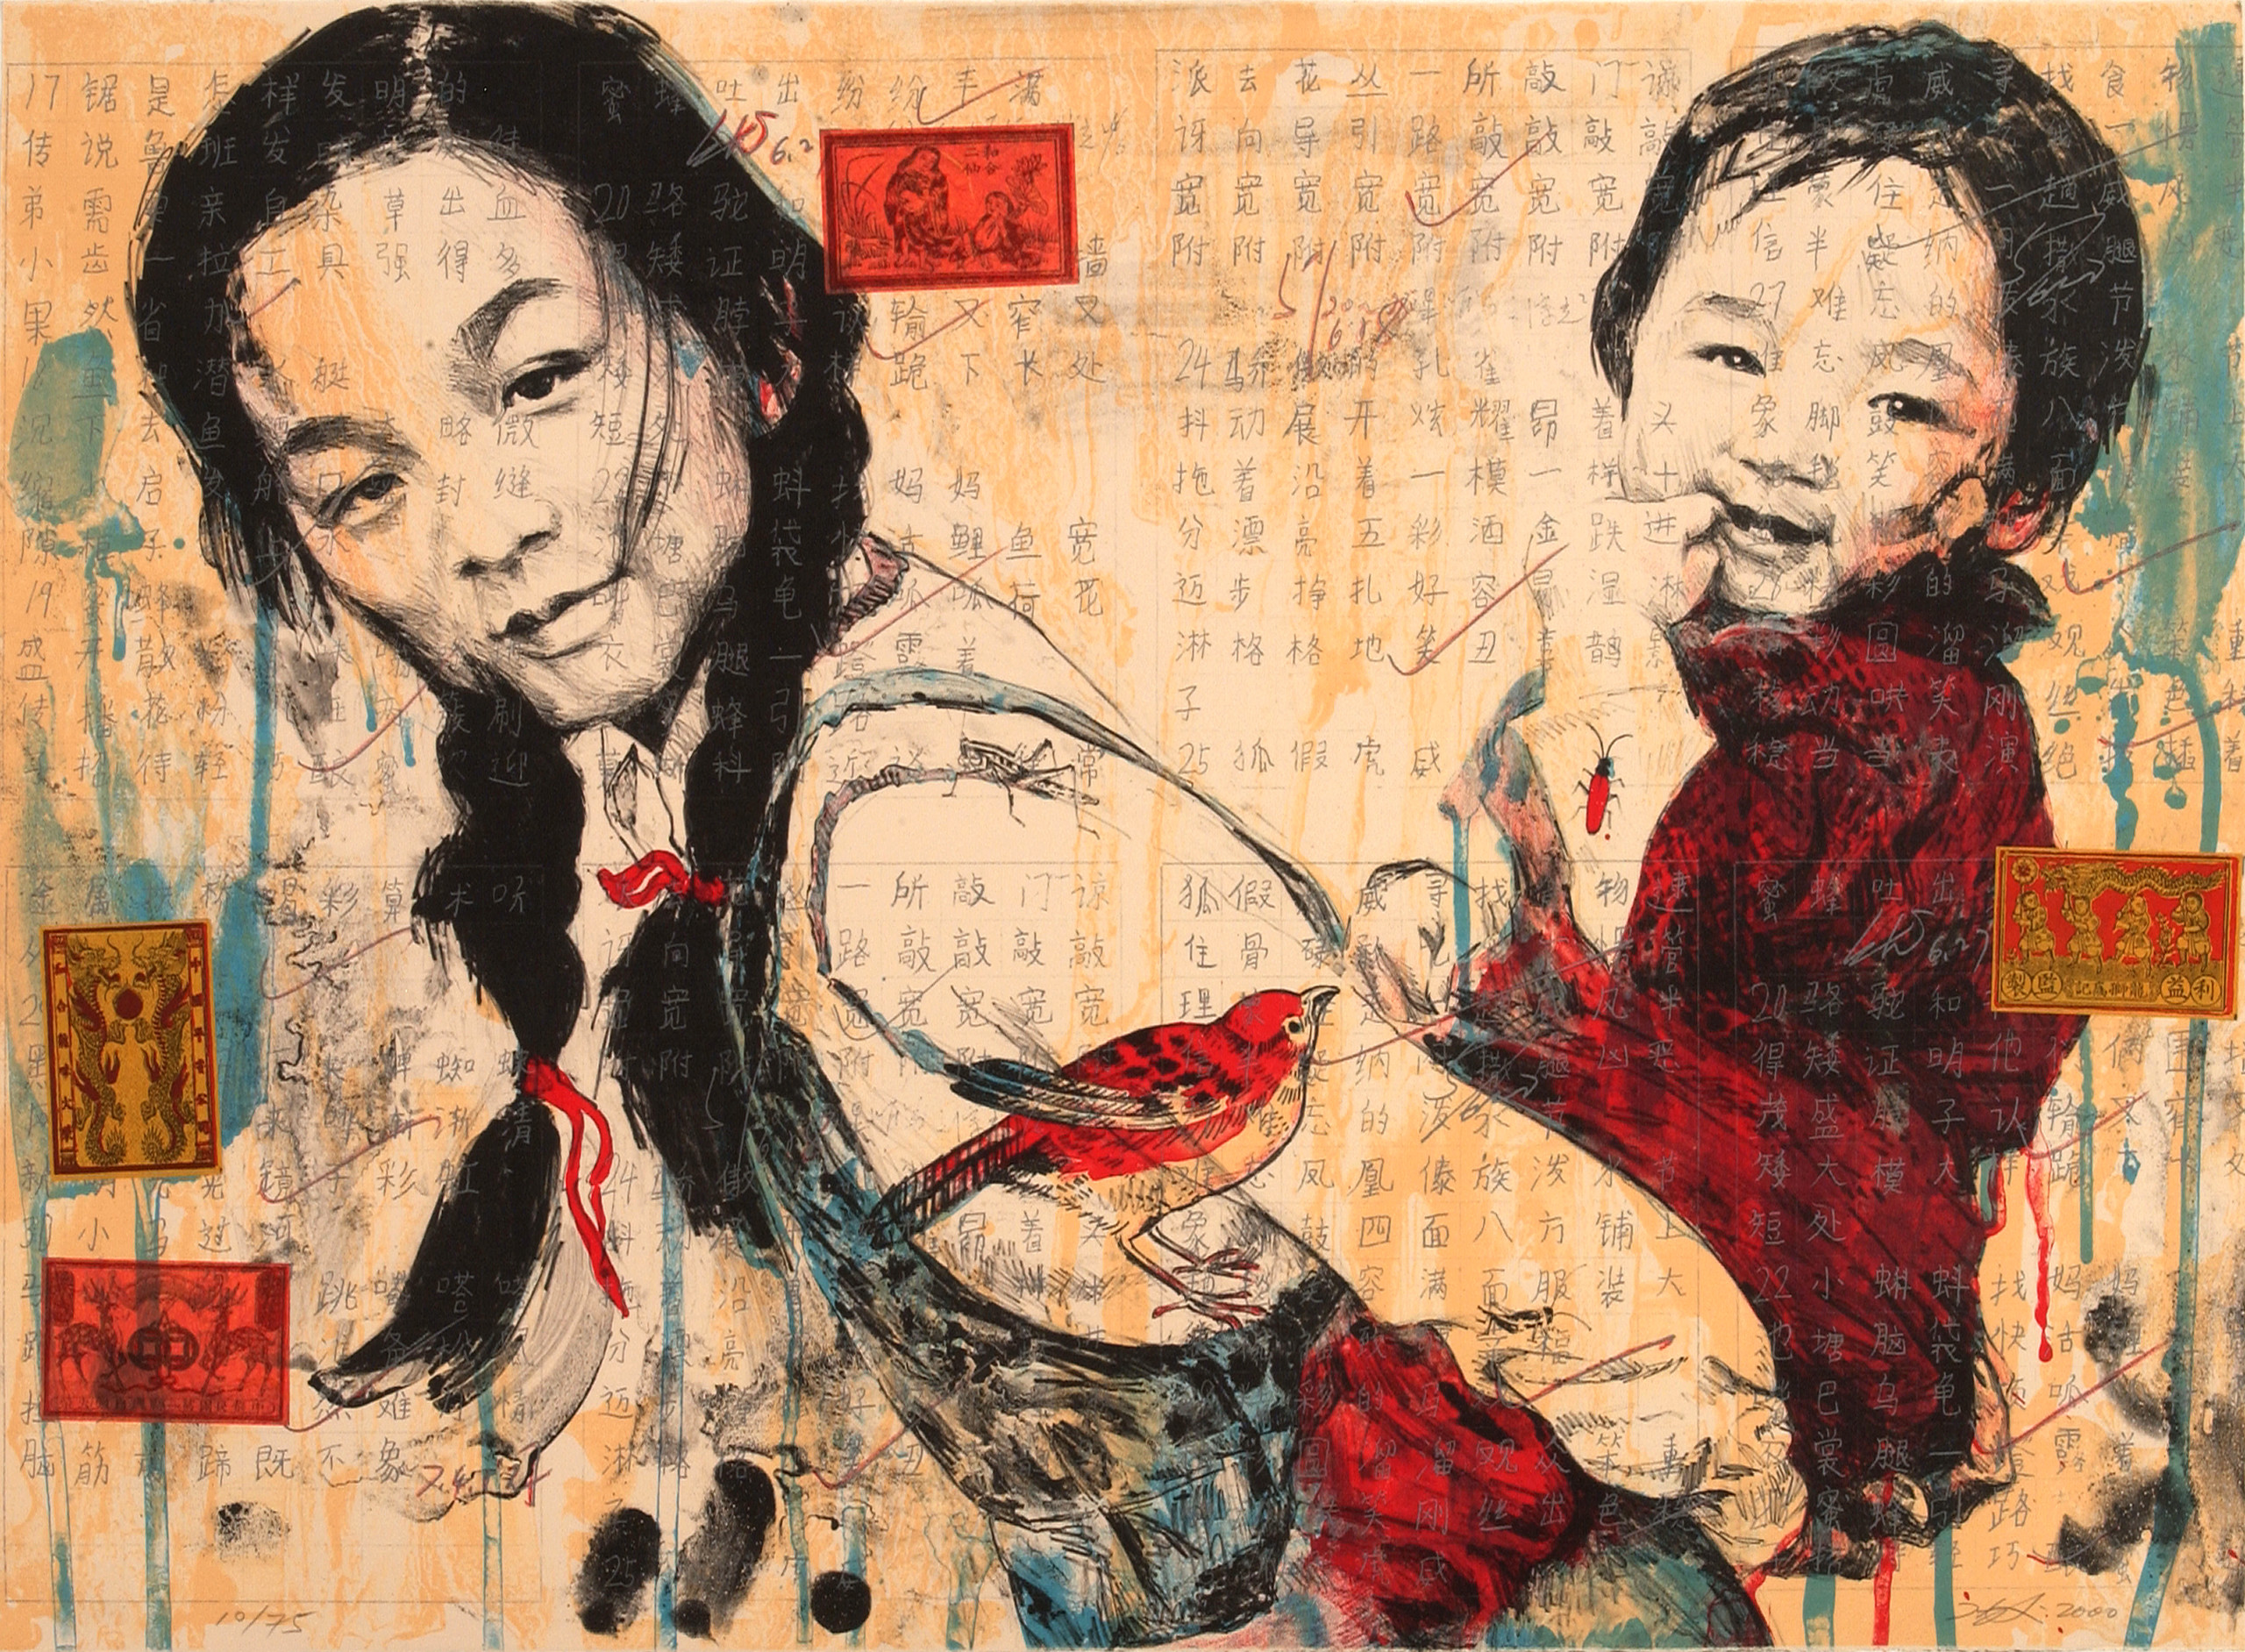 Two smiling Chinese girls with light skin and black hair painted on a collage of Chinese writing, small red envelopes, a red bird and bug, and blue paint drippings. The older girl, seen waist up, wears her hair in two braids and carries the younger girl in crimson clothes on her back.